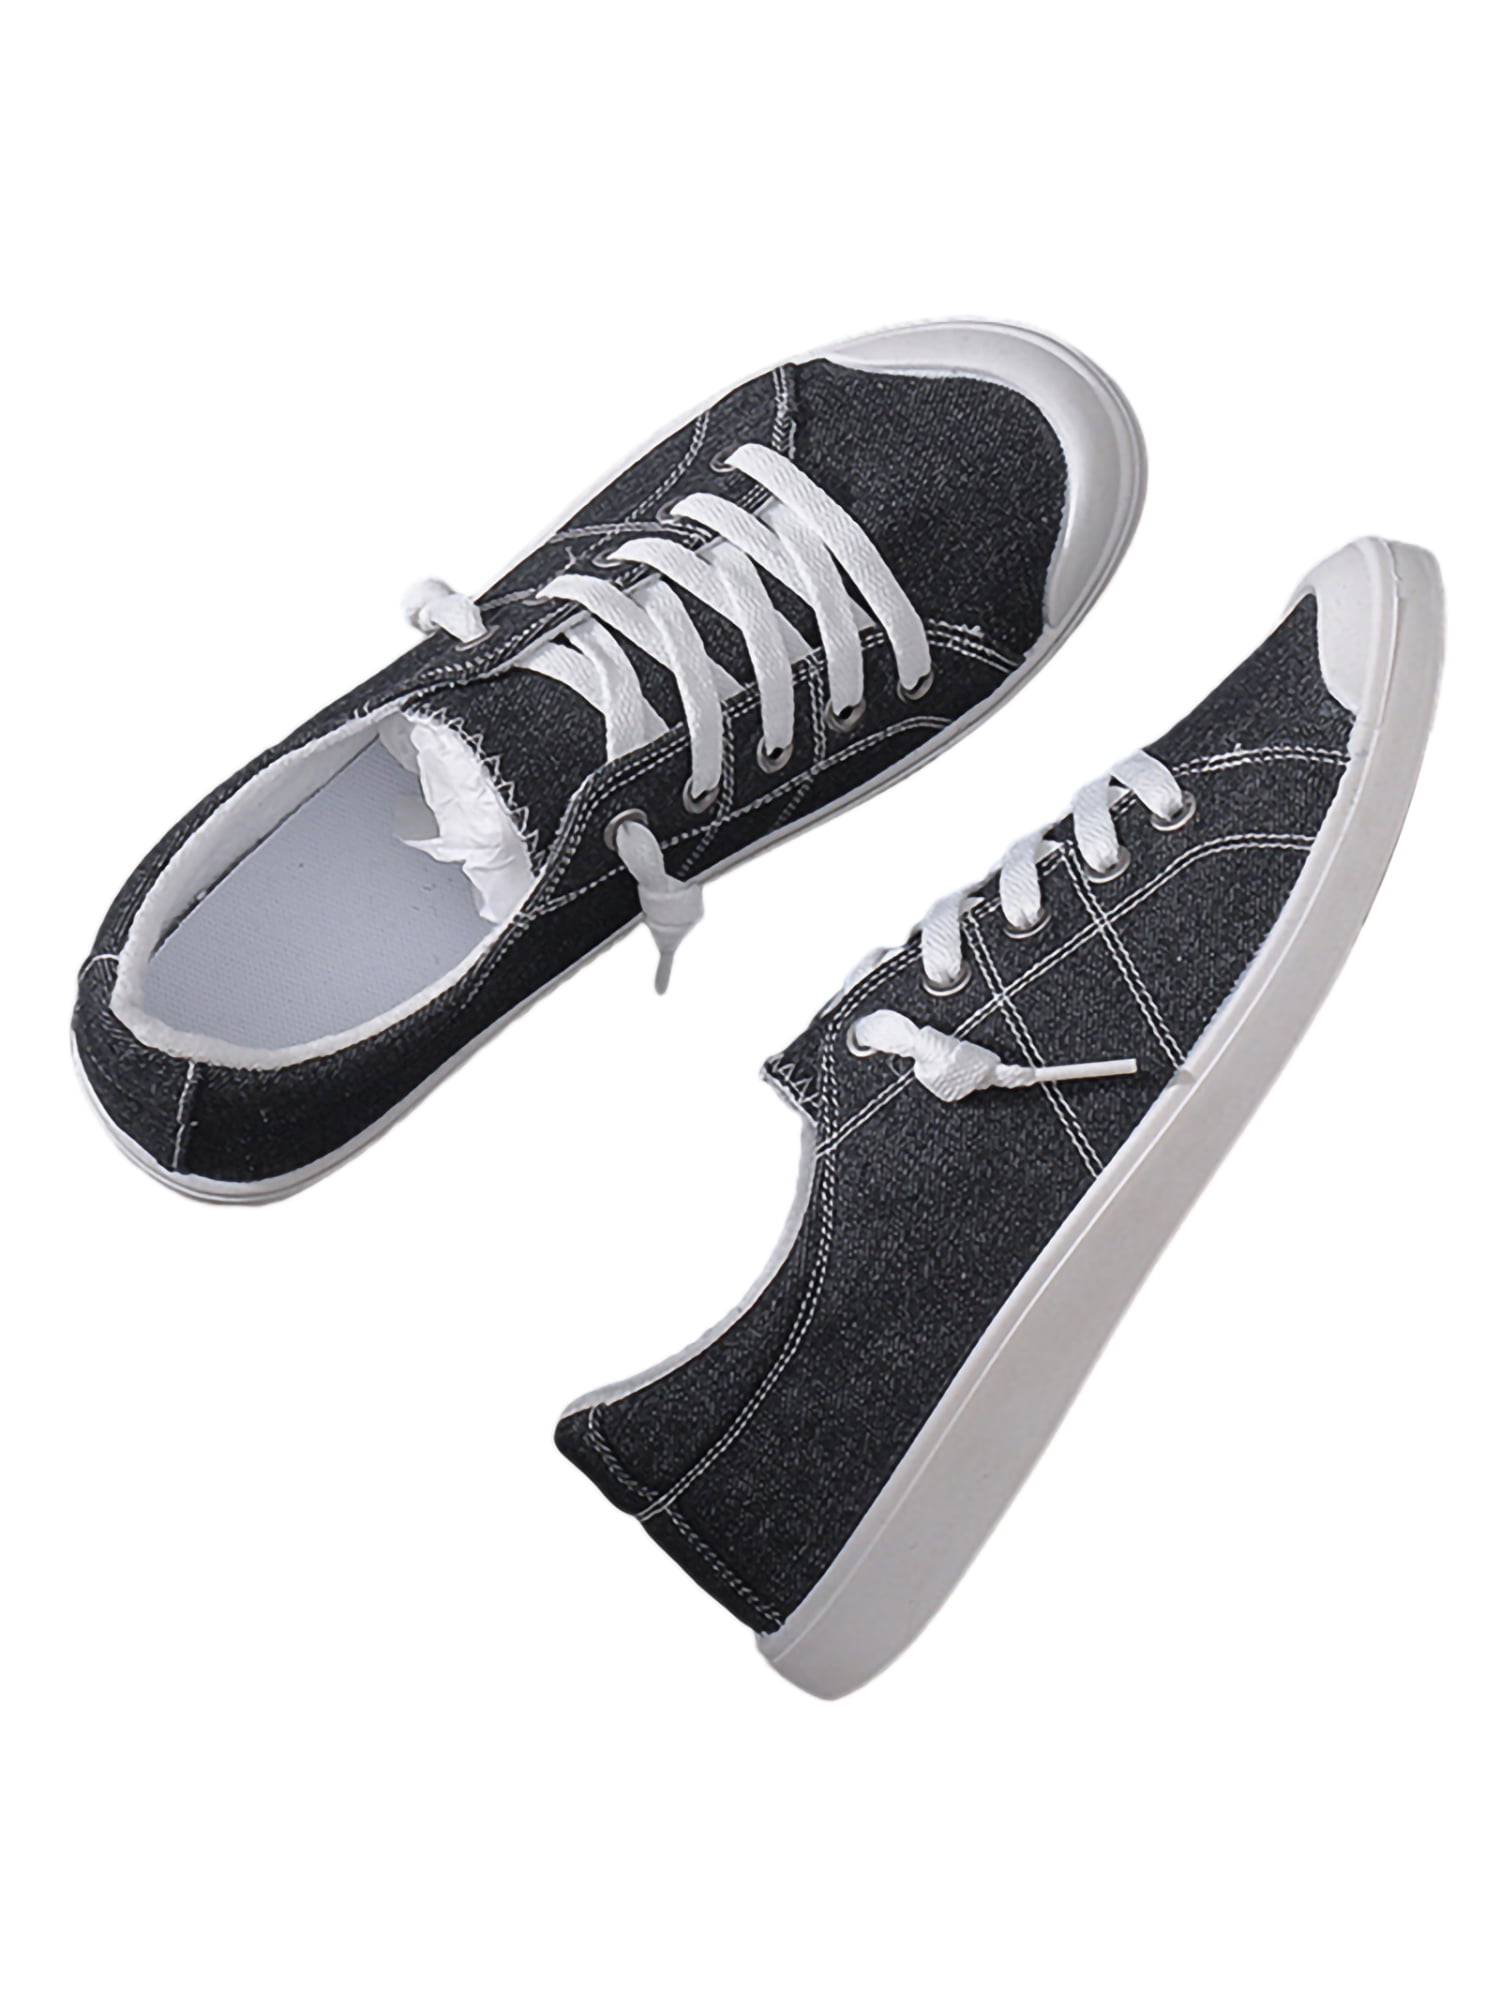 ladies CANVAS SHOES TRAINERS CASUAL LACE UP FLAT BLACK ALL SIZES 